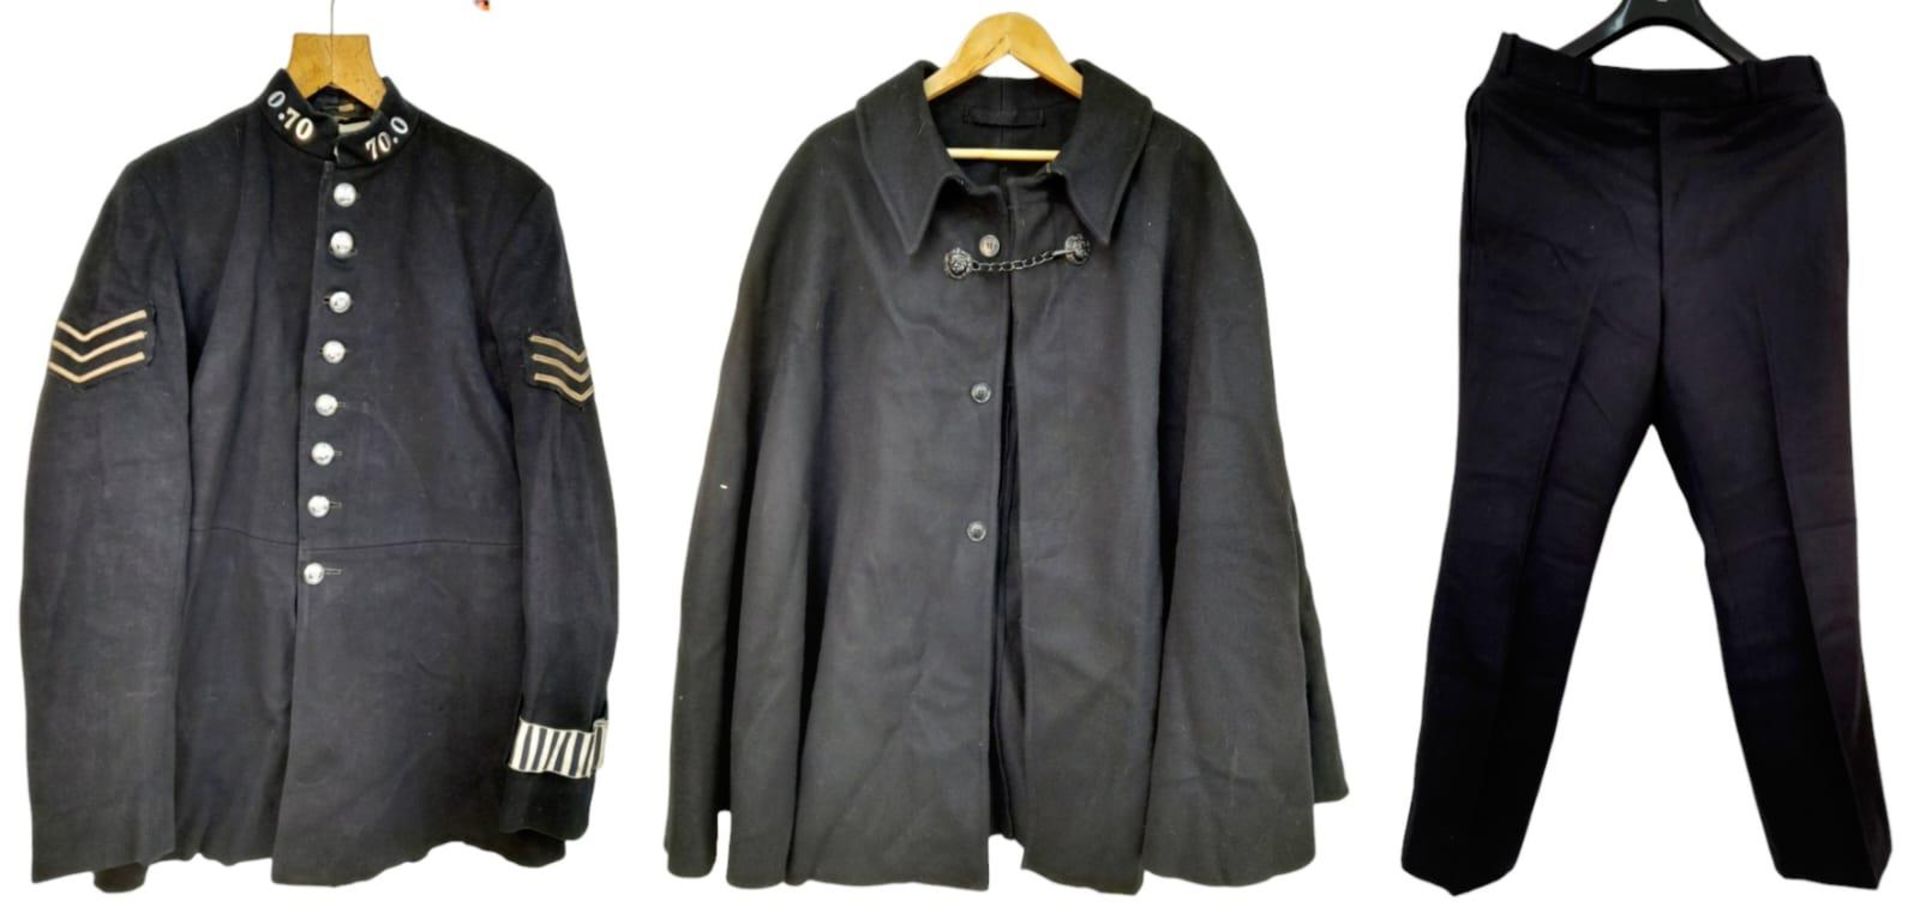 An Antique Victorian Police Officers (Sergeant) High Collar Tunic - With matching vintage trousers